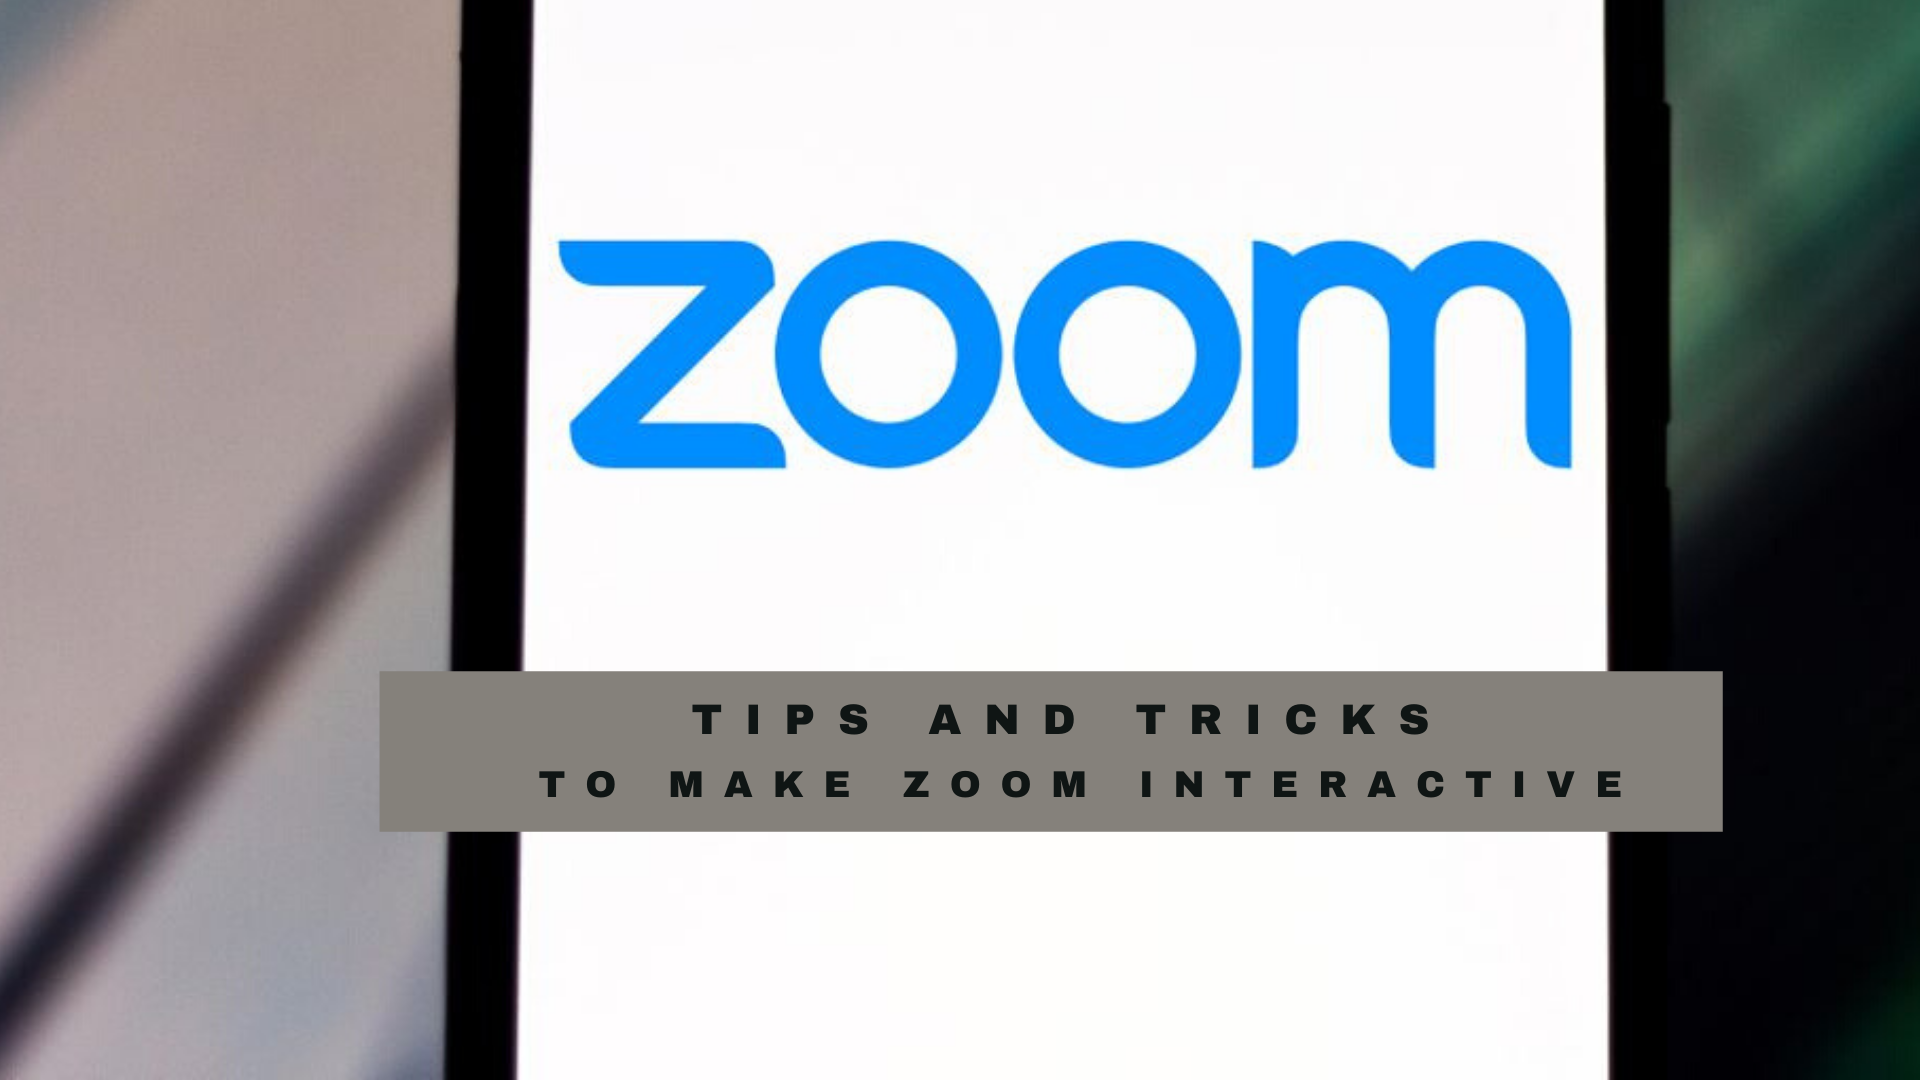 TIPS AND TRICKS TO MAKE ZOOM INTERACTIVE